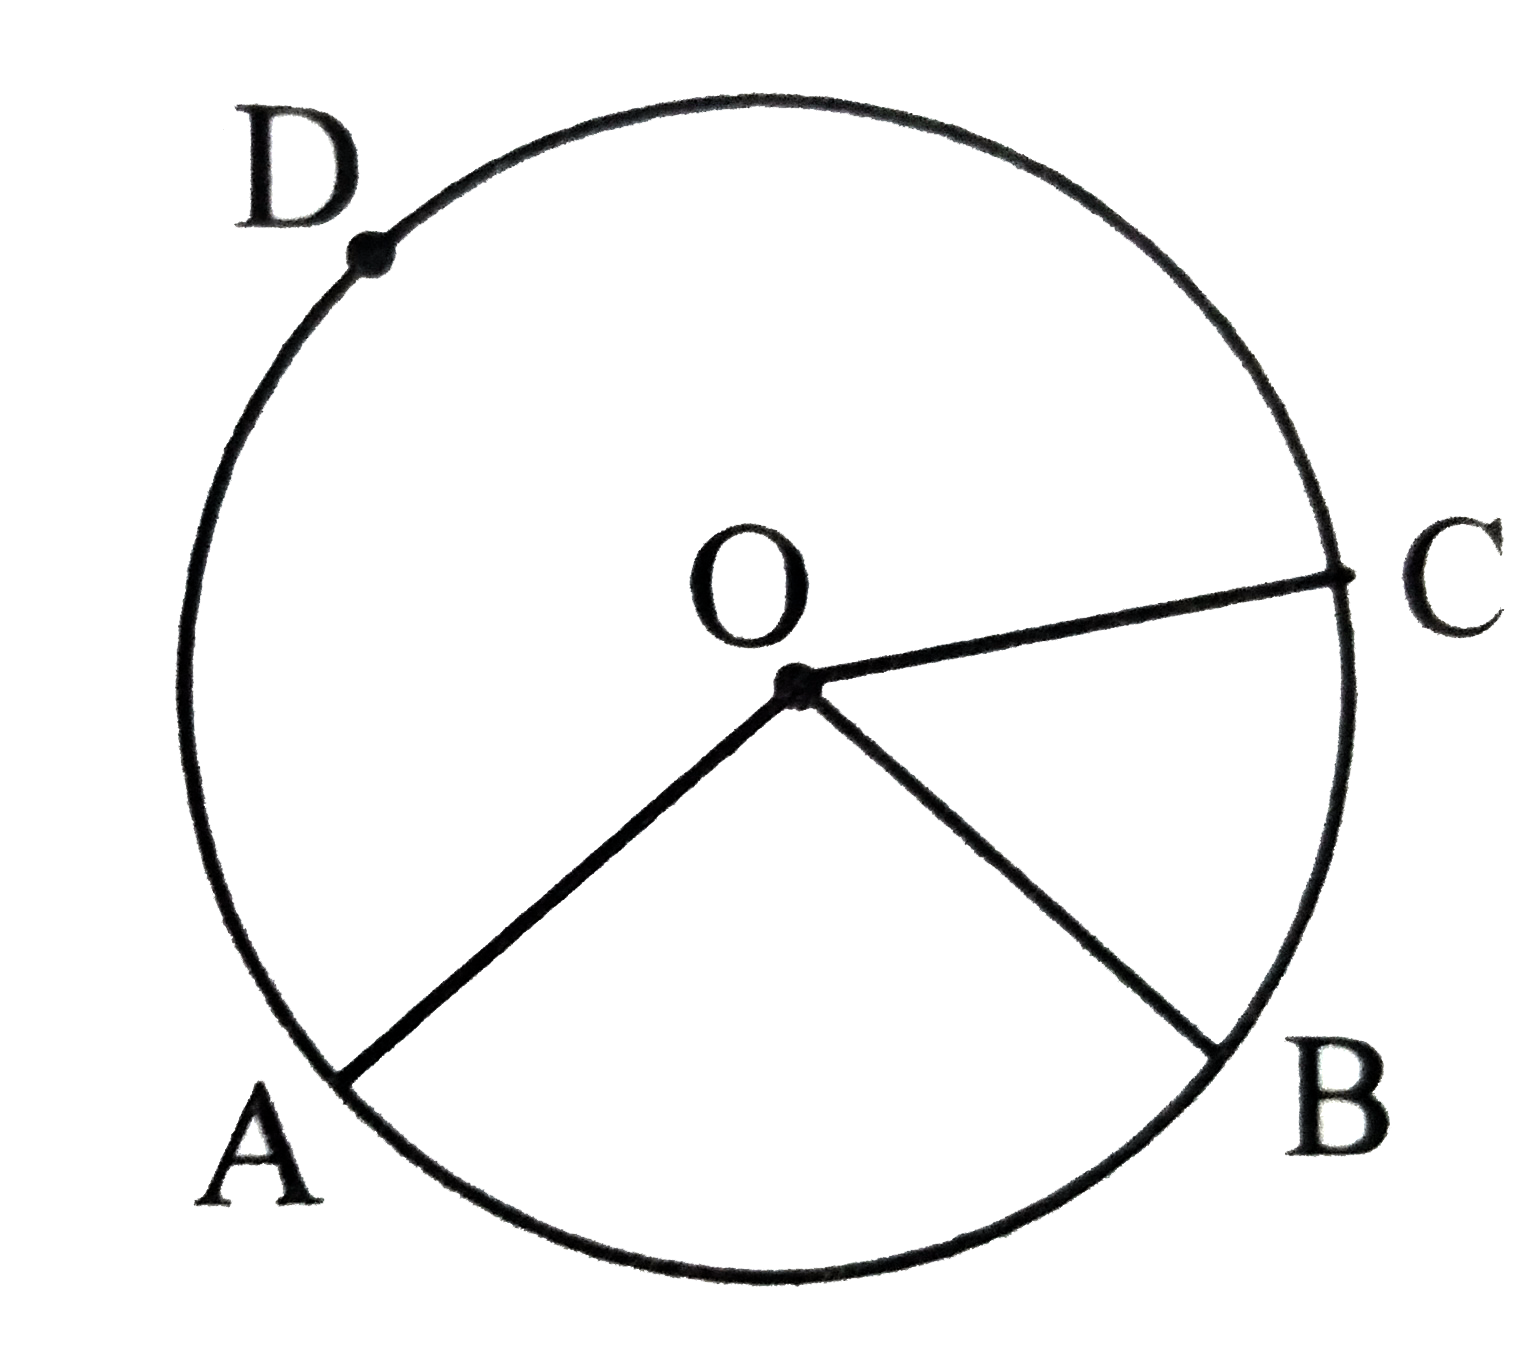 In the adjoining figure, points A, B,C and D are on   the circle. The measures of angleAOB and angleBOC are 80^@  and 75^@ respectively. Find measure of arc ABC, arc ADB  and arc BAC.